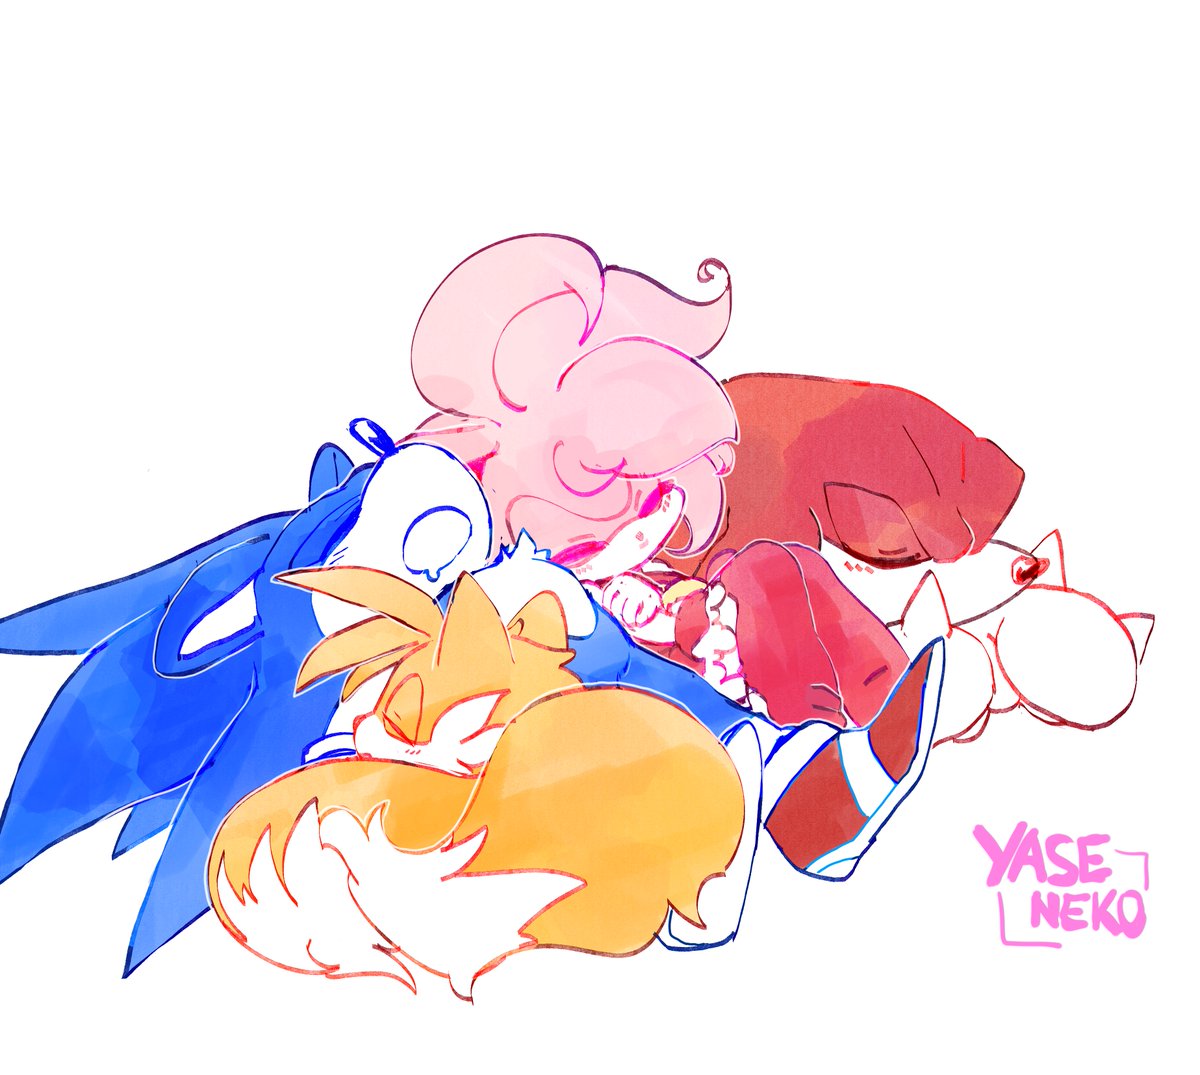 OH GOD WHAT HAVE YOU DONE THEY ARE ALL SLEEPING NOW

#sonic #knuckles #TailsTheFox #tailswithdabomb #sonamy #SonicTheHedgehog #amyrose